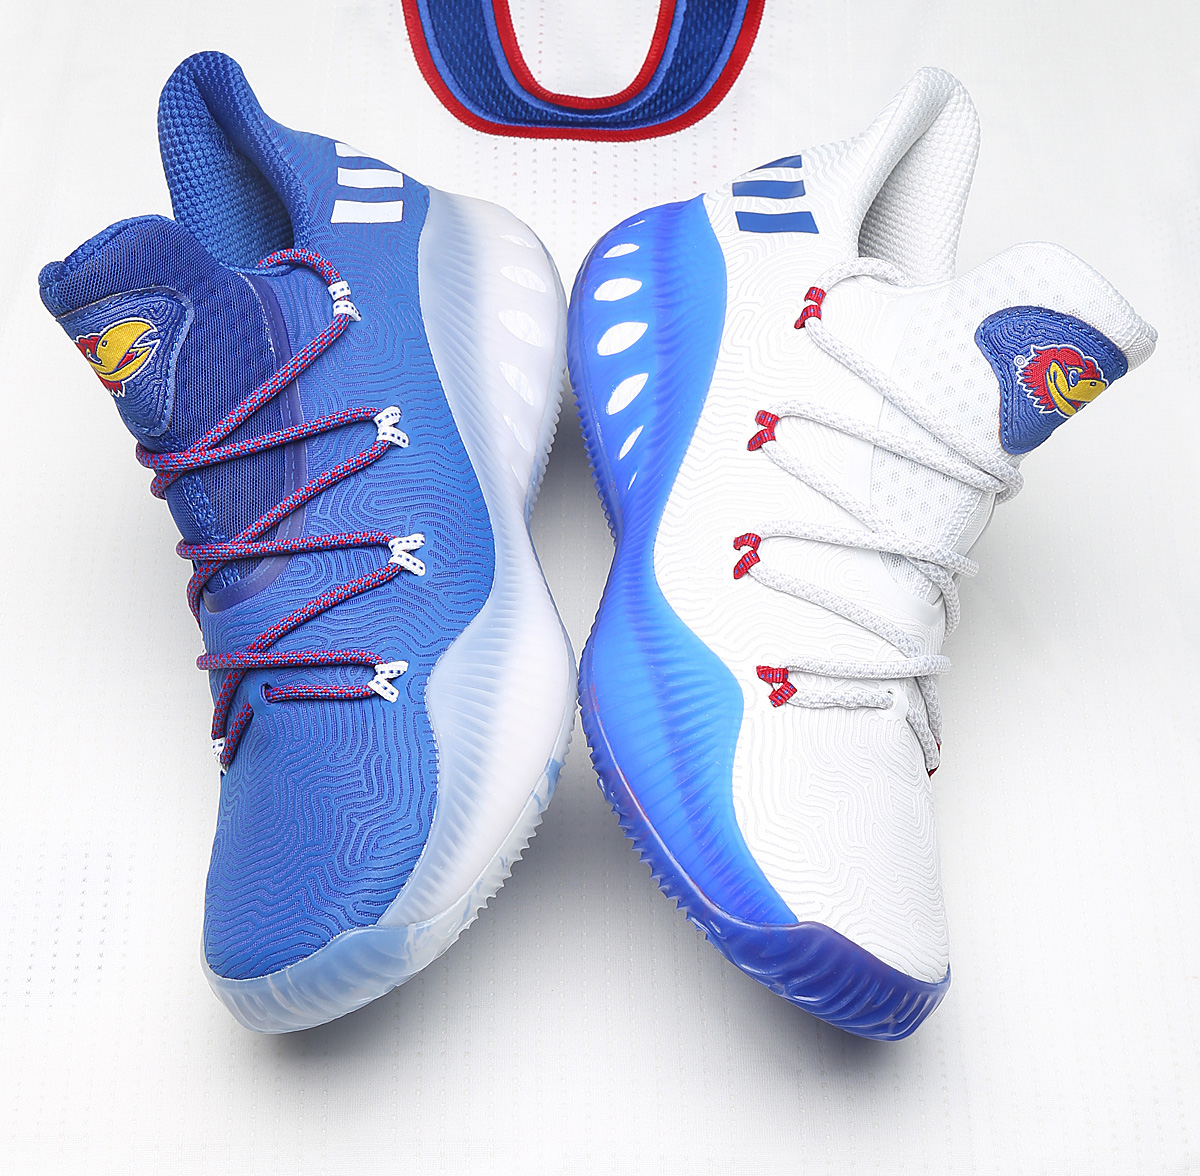 Exclusive Look At Kansas' Adidas Crazy Explosive Low PEs For March ...